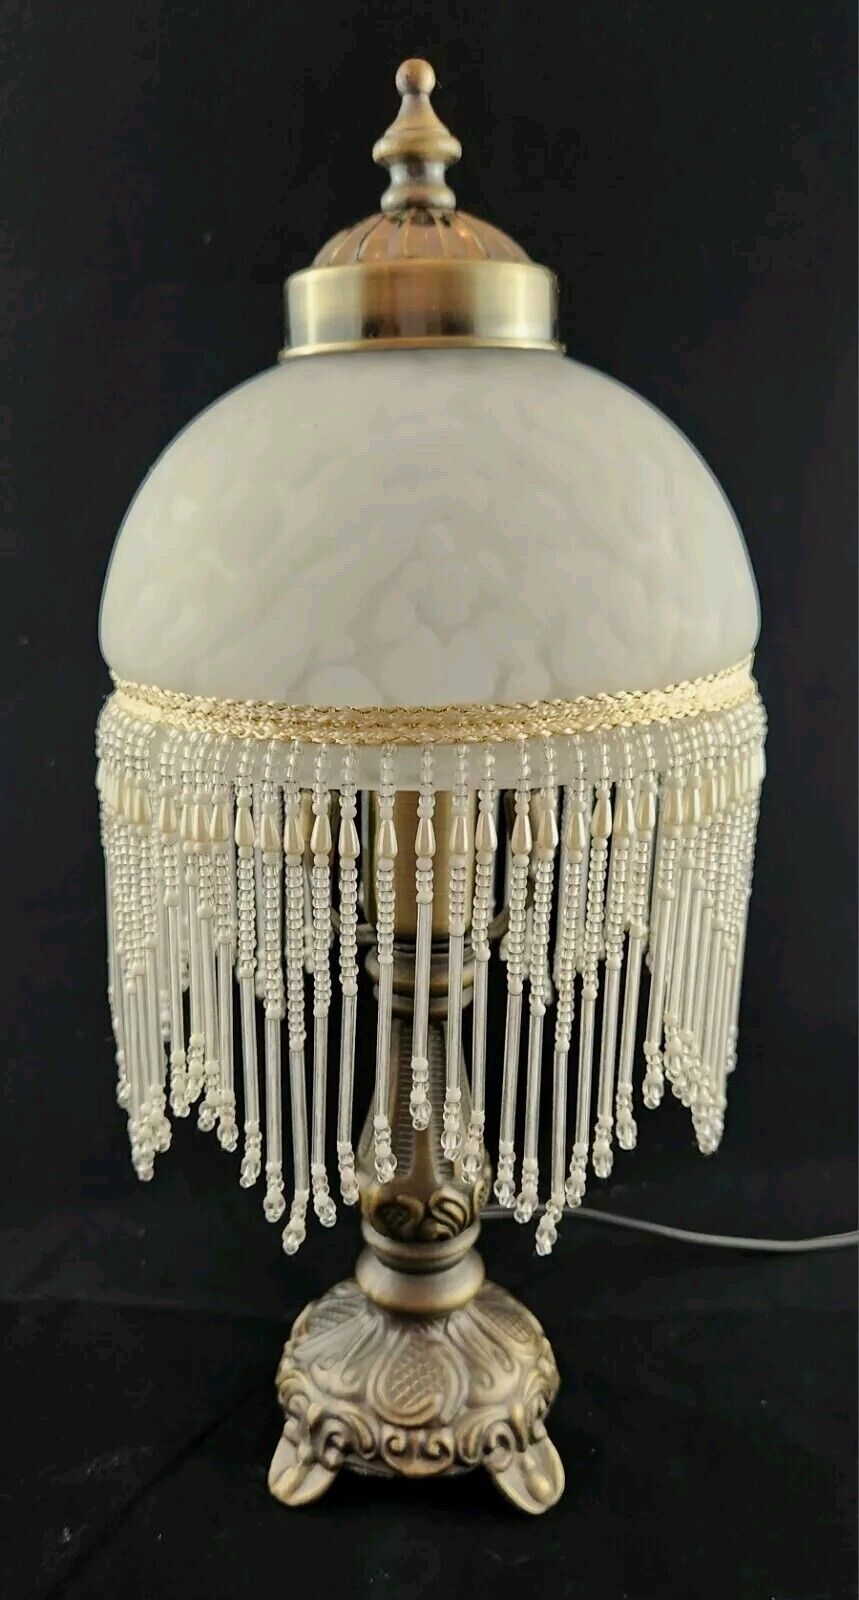 Vintage Victorian Boudoir Beaded Lamp Frosted Glass Dome Shade Beaded Fringe EUC